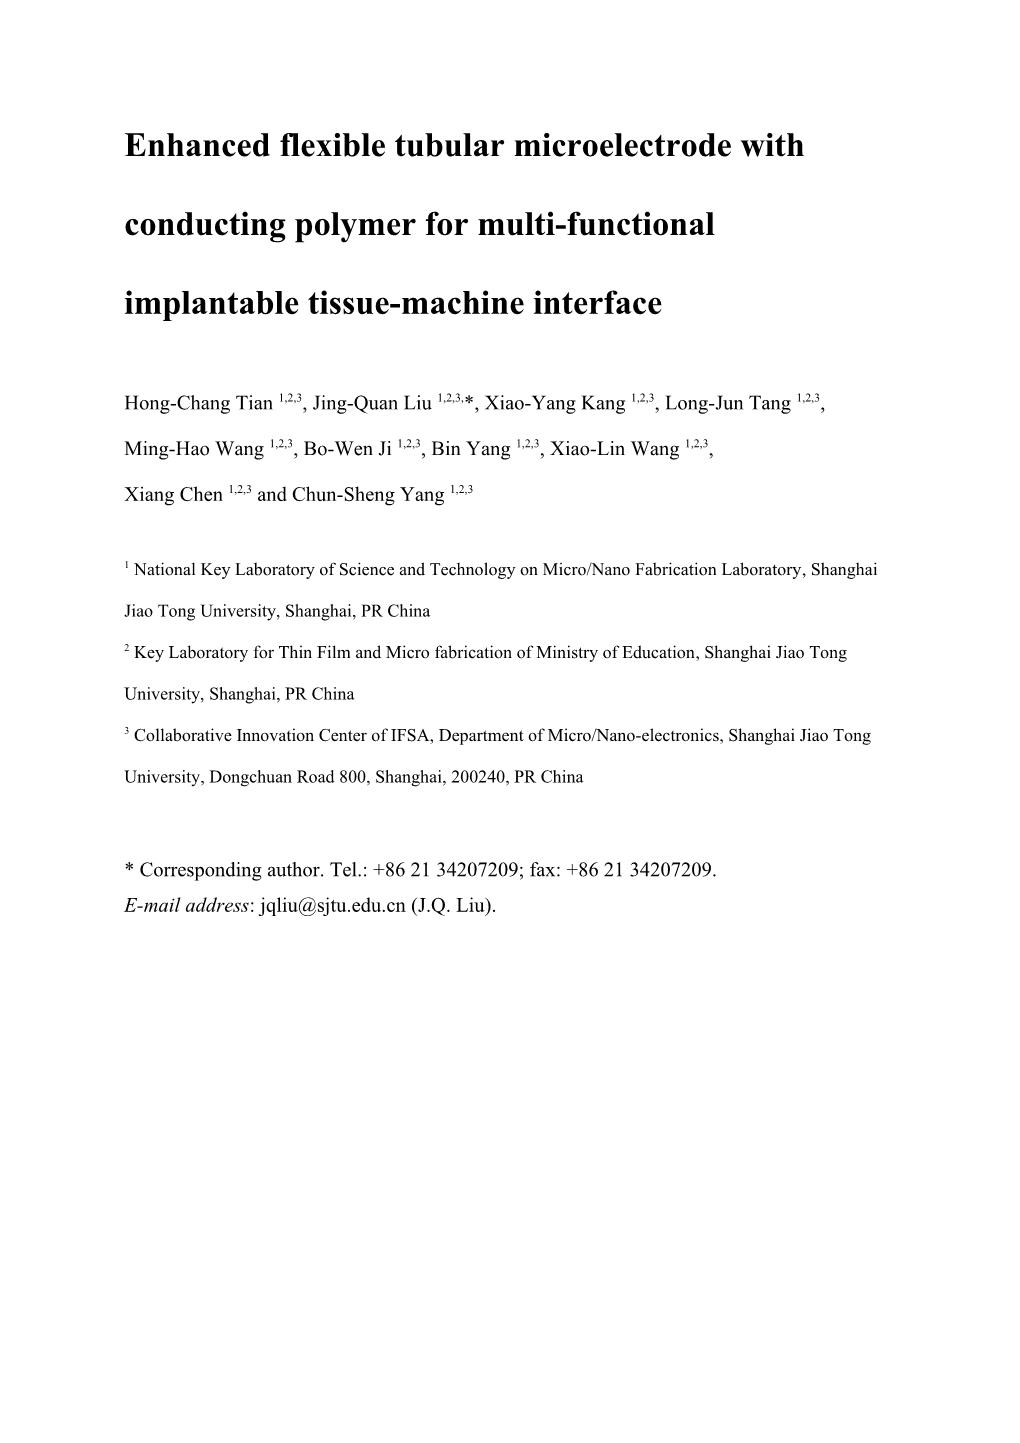 Enhanced Flexible Tubular Microelectrode with Conducting Polymer for Multi-Functional